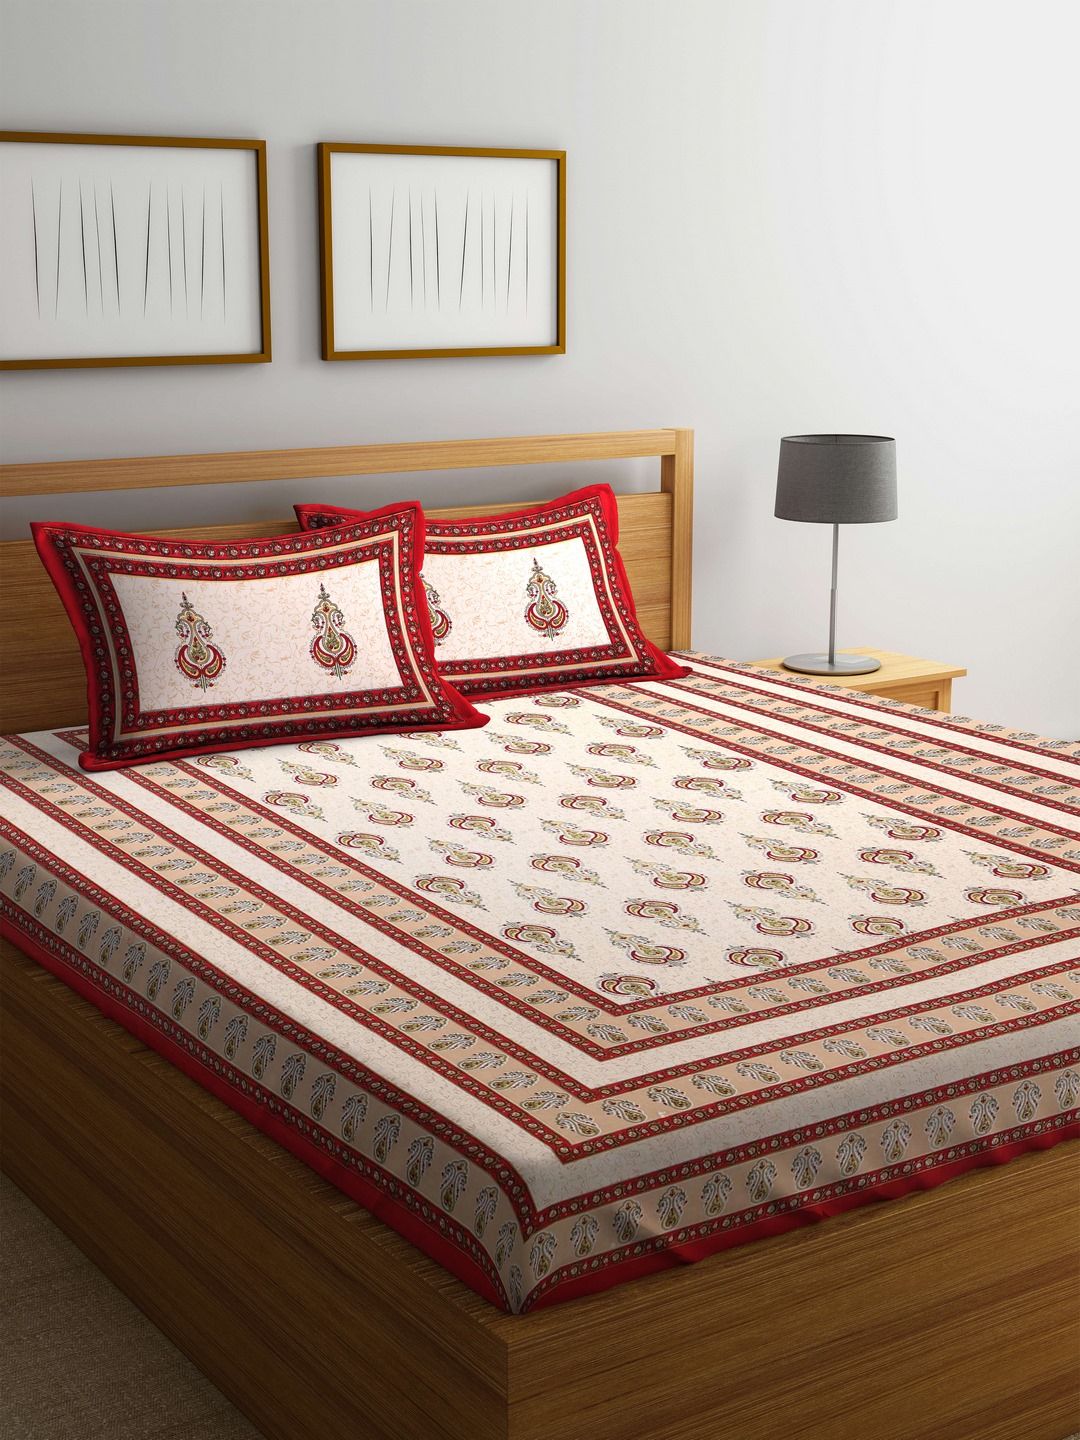 Rajasthan Decor Cream-Coloured & Red Abstract Flat 144 TC Cotton 1 King Bedsheet with 2 Pillow Covers Price in India